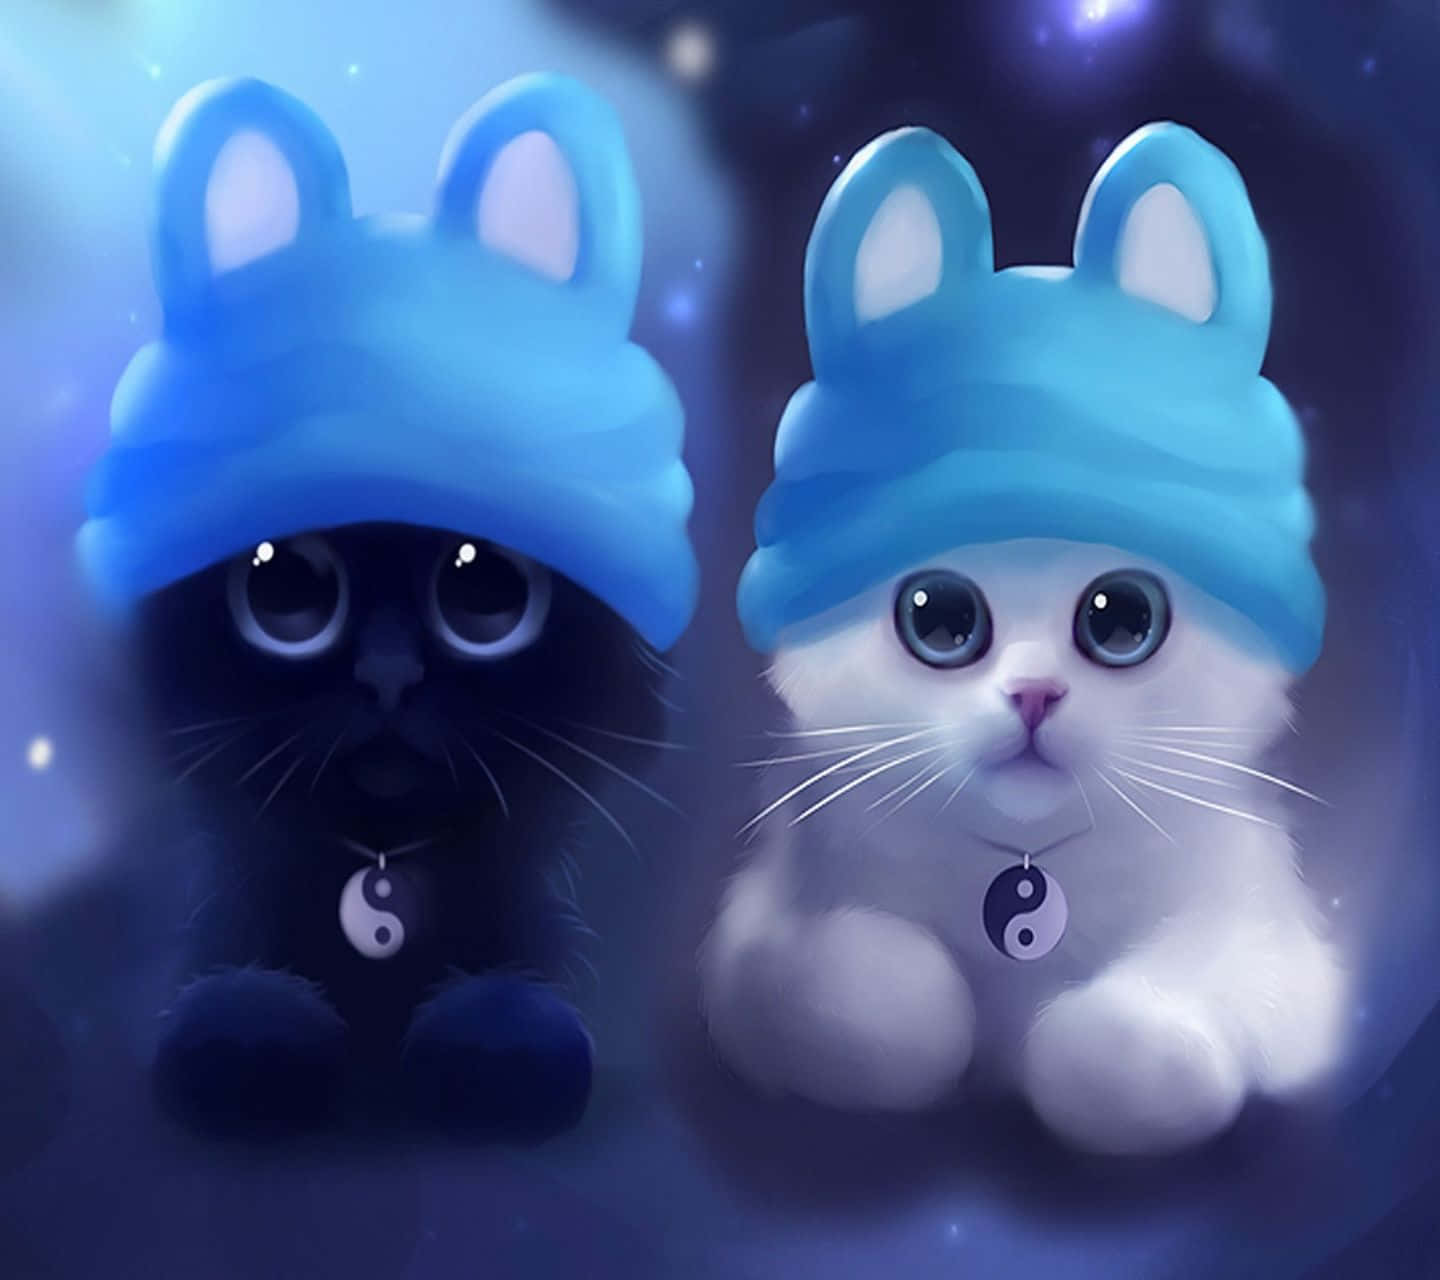 Meow, a couple matching cat pfps : r/MatchingPfps